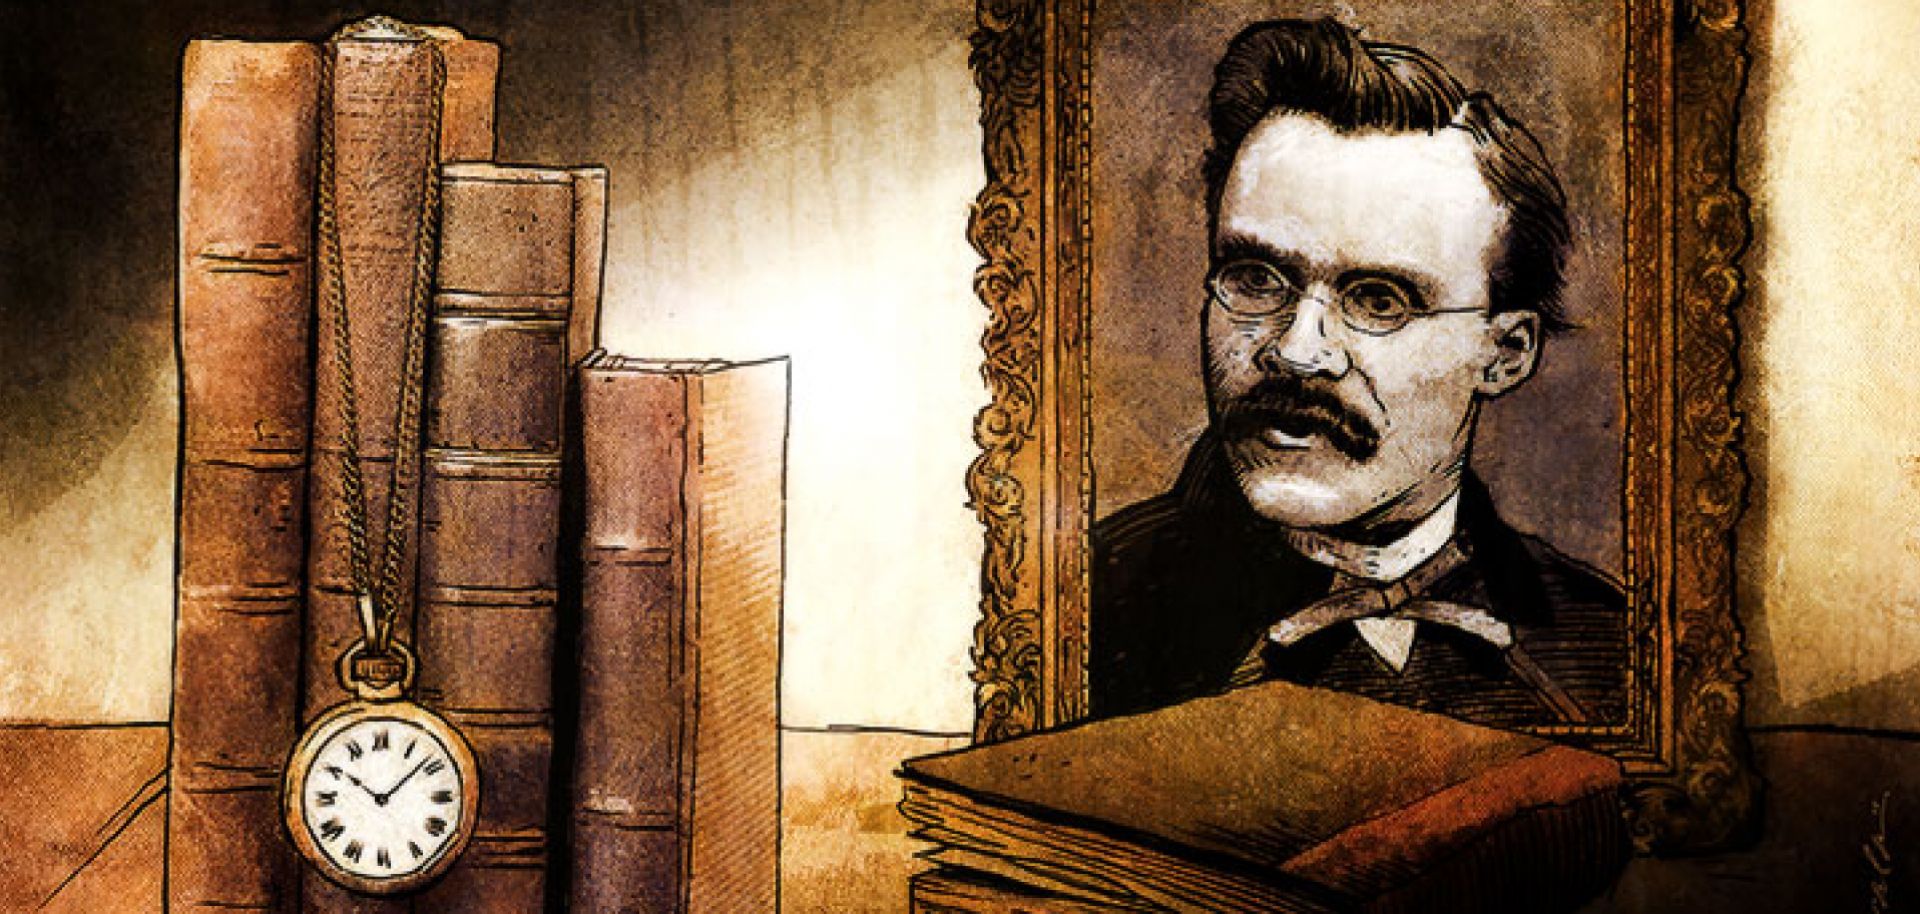 Friedrich Nietzsche's observations about the misuse of history to sow chaos in the present hold as true today as they did in the 19th century when he wrote them.